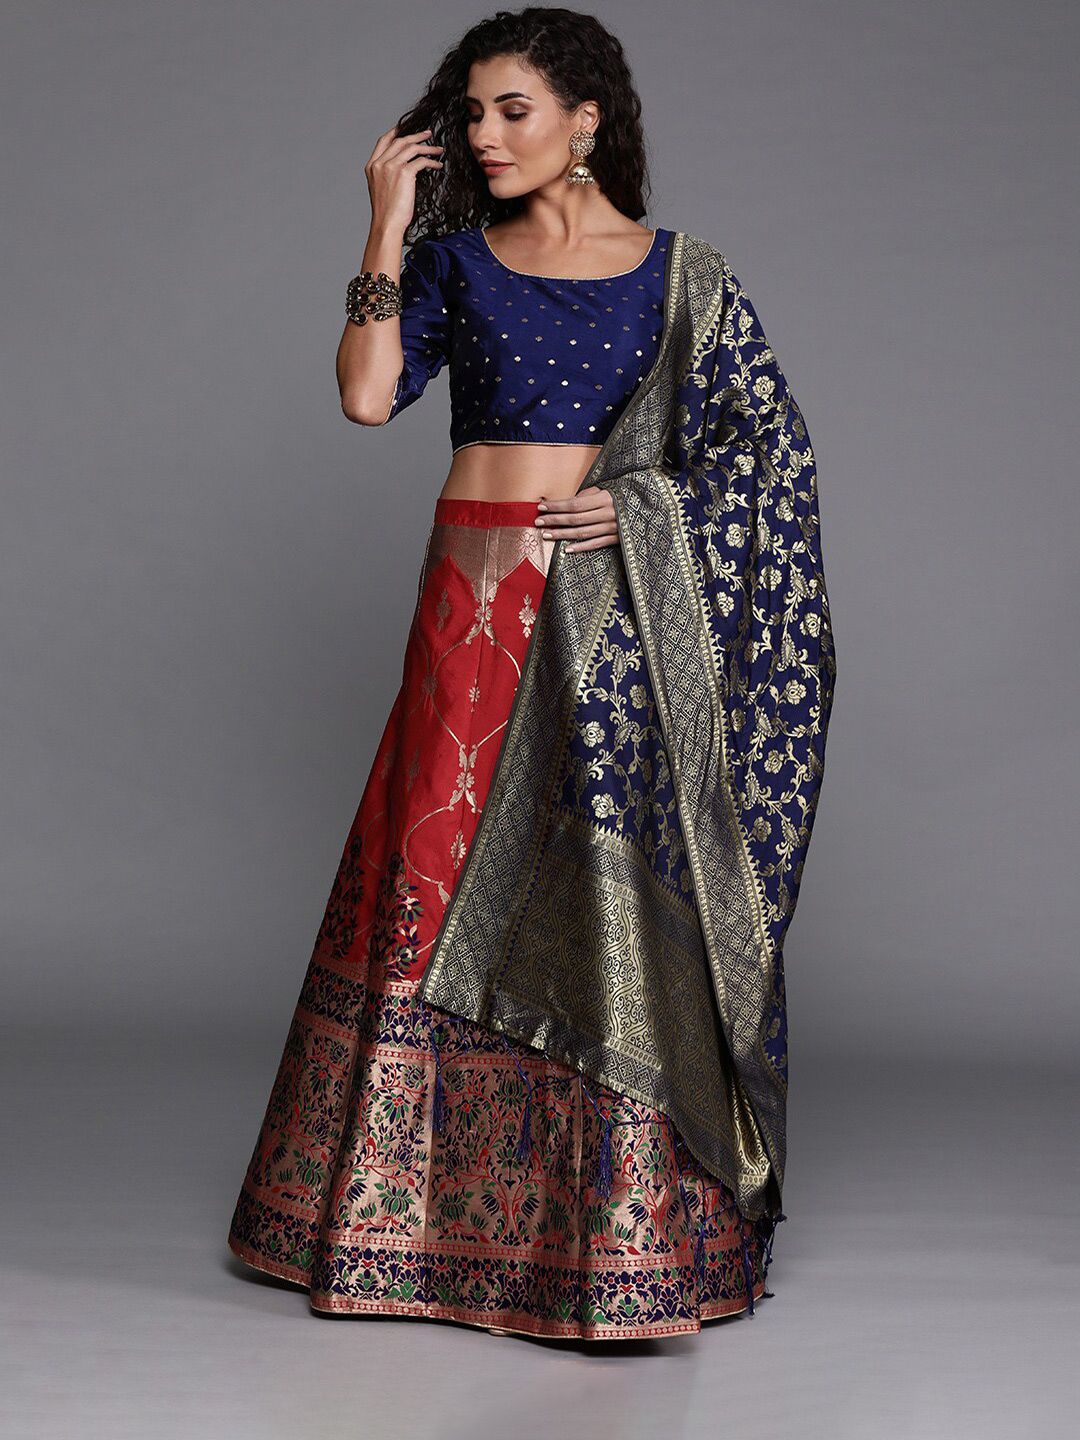 SHADOW & SAINING Red & Navy Blue Semi-Stitched Lehenga Unstitched Blouse With Dupatta Price in India